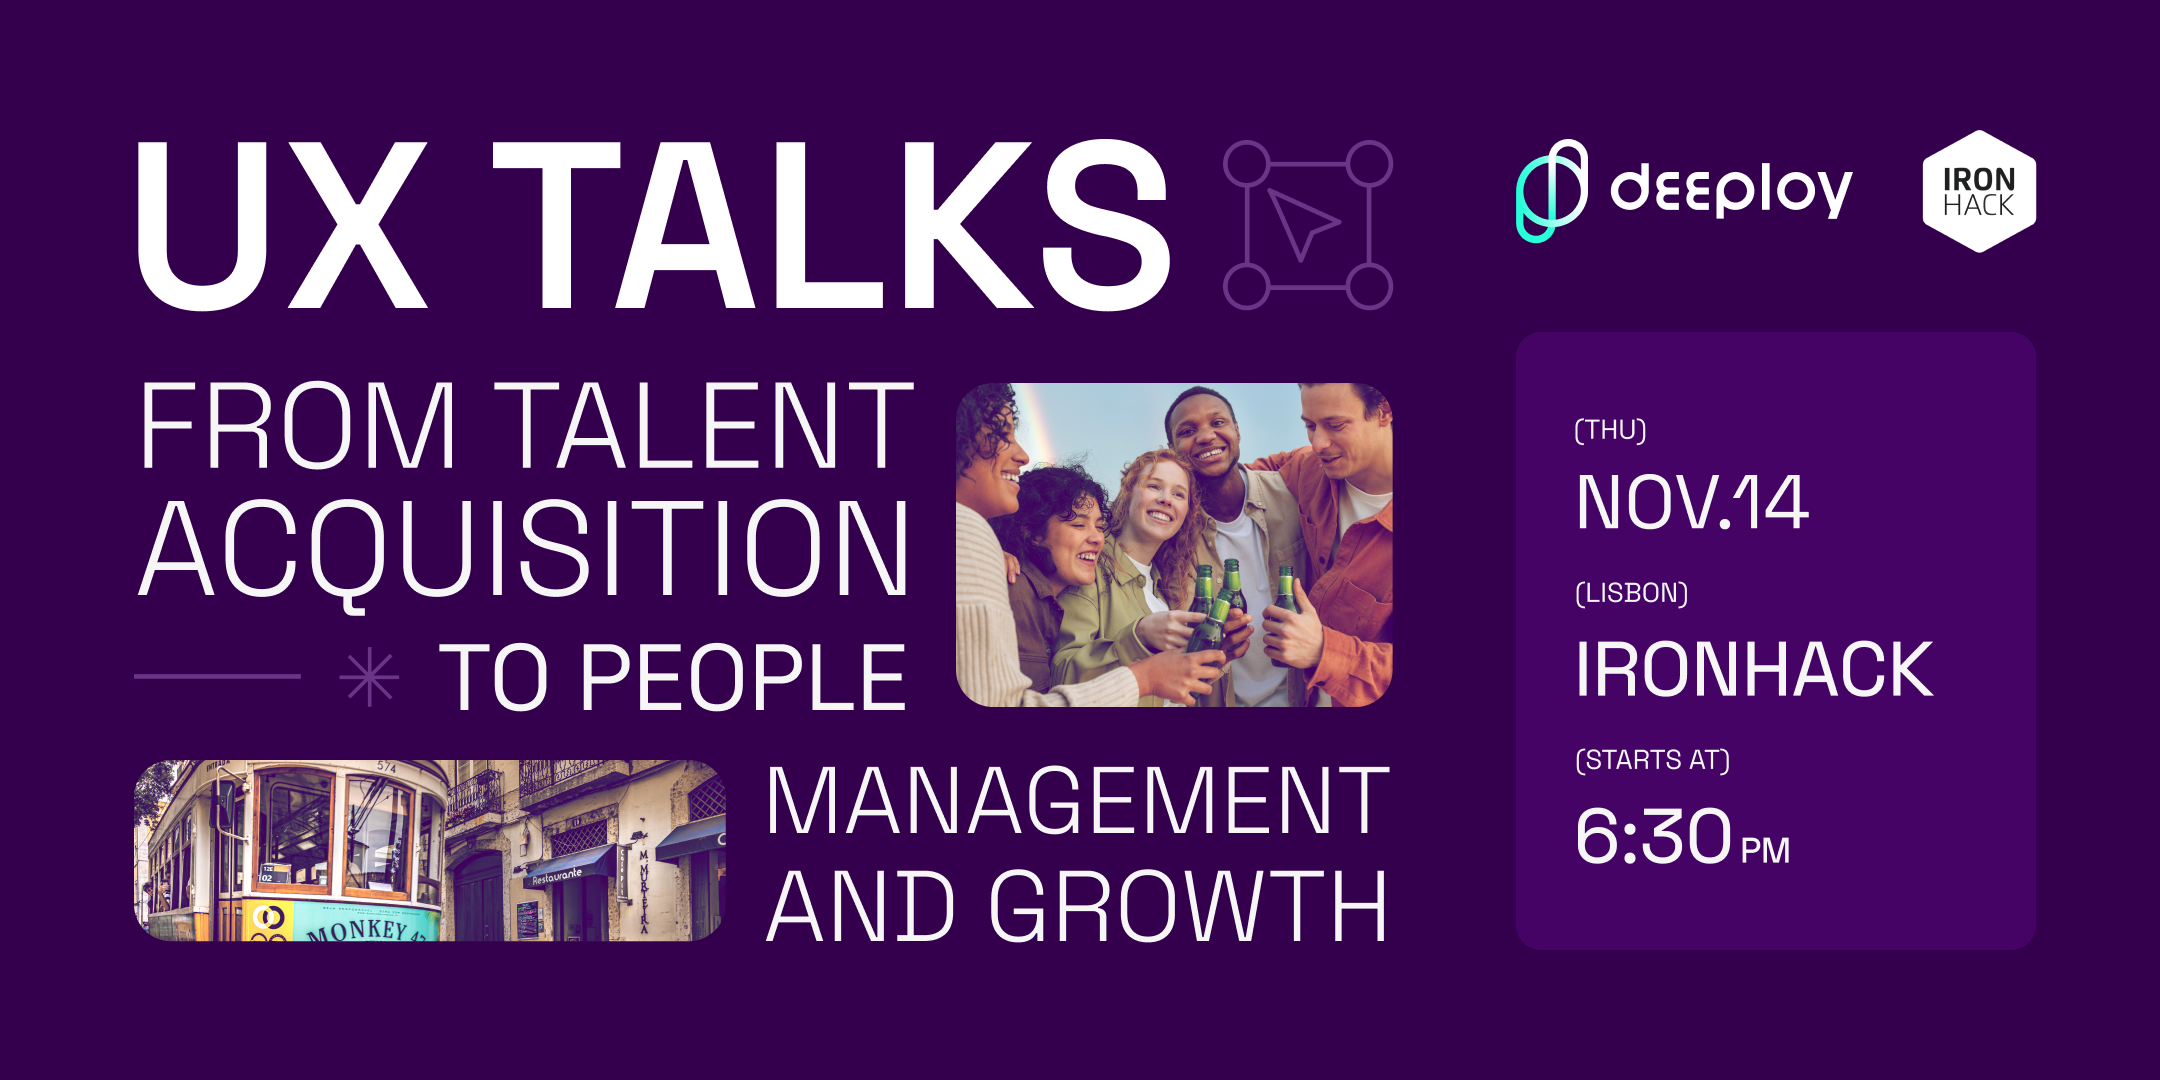 UX Talks: from talent acquisition to people management and growth